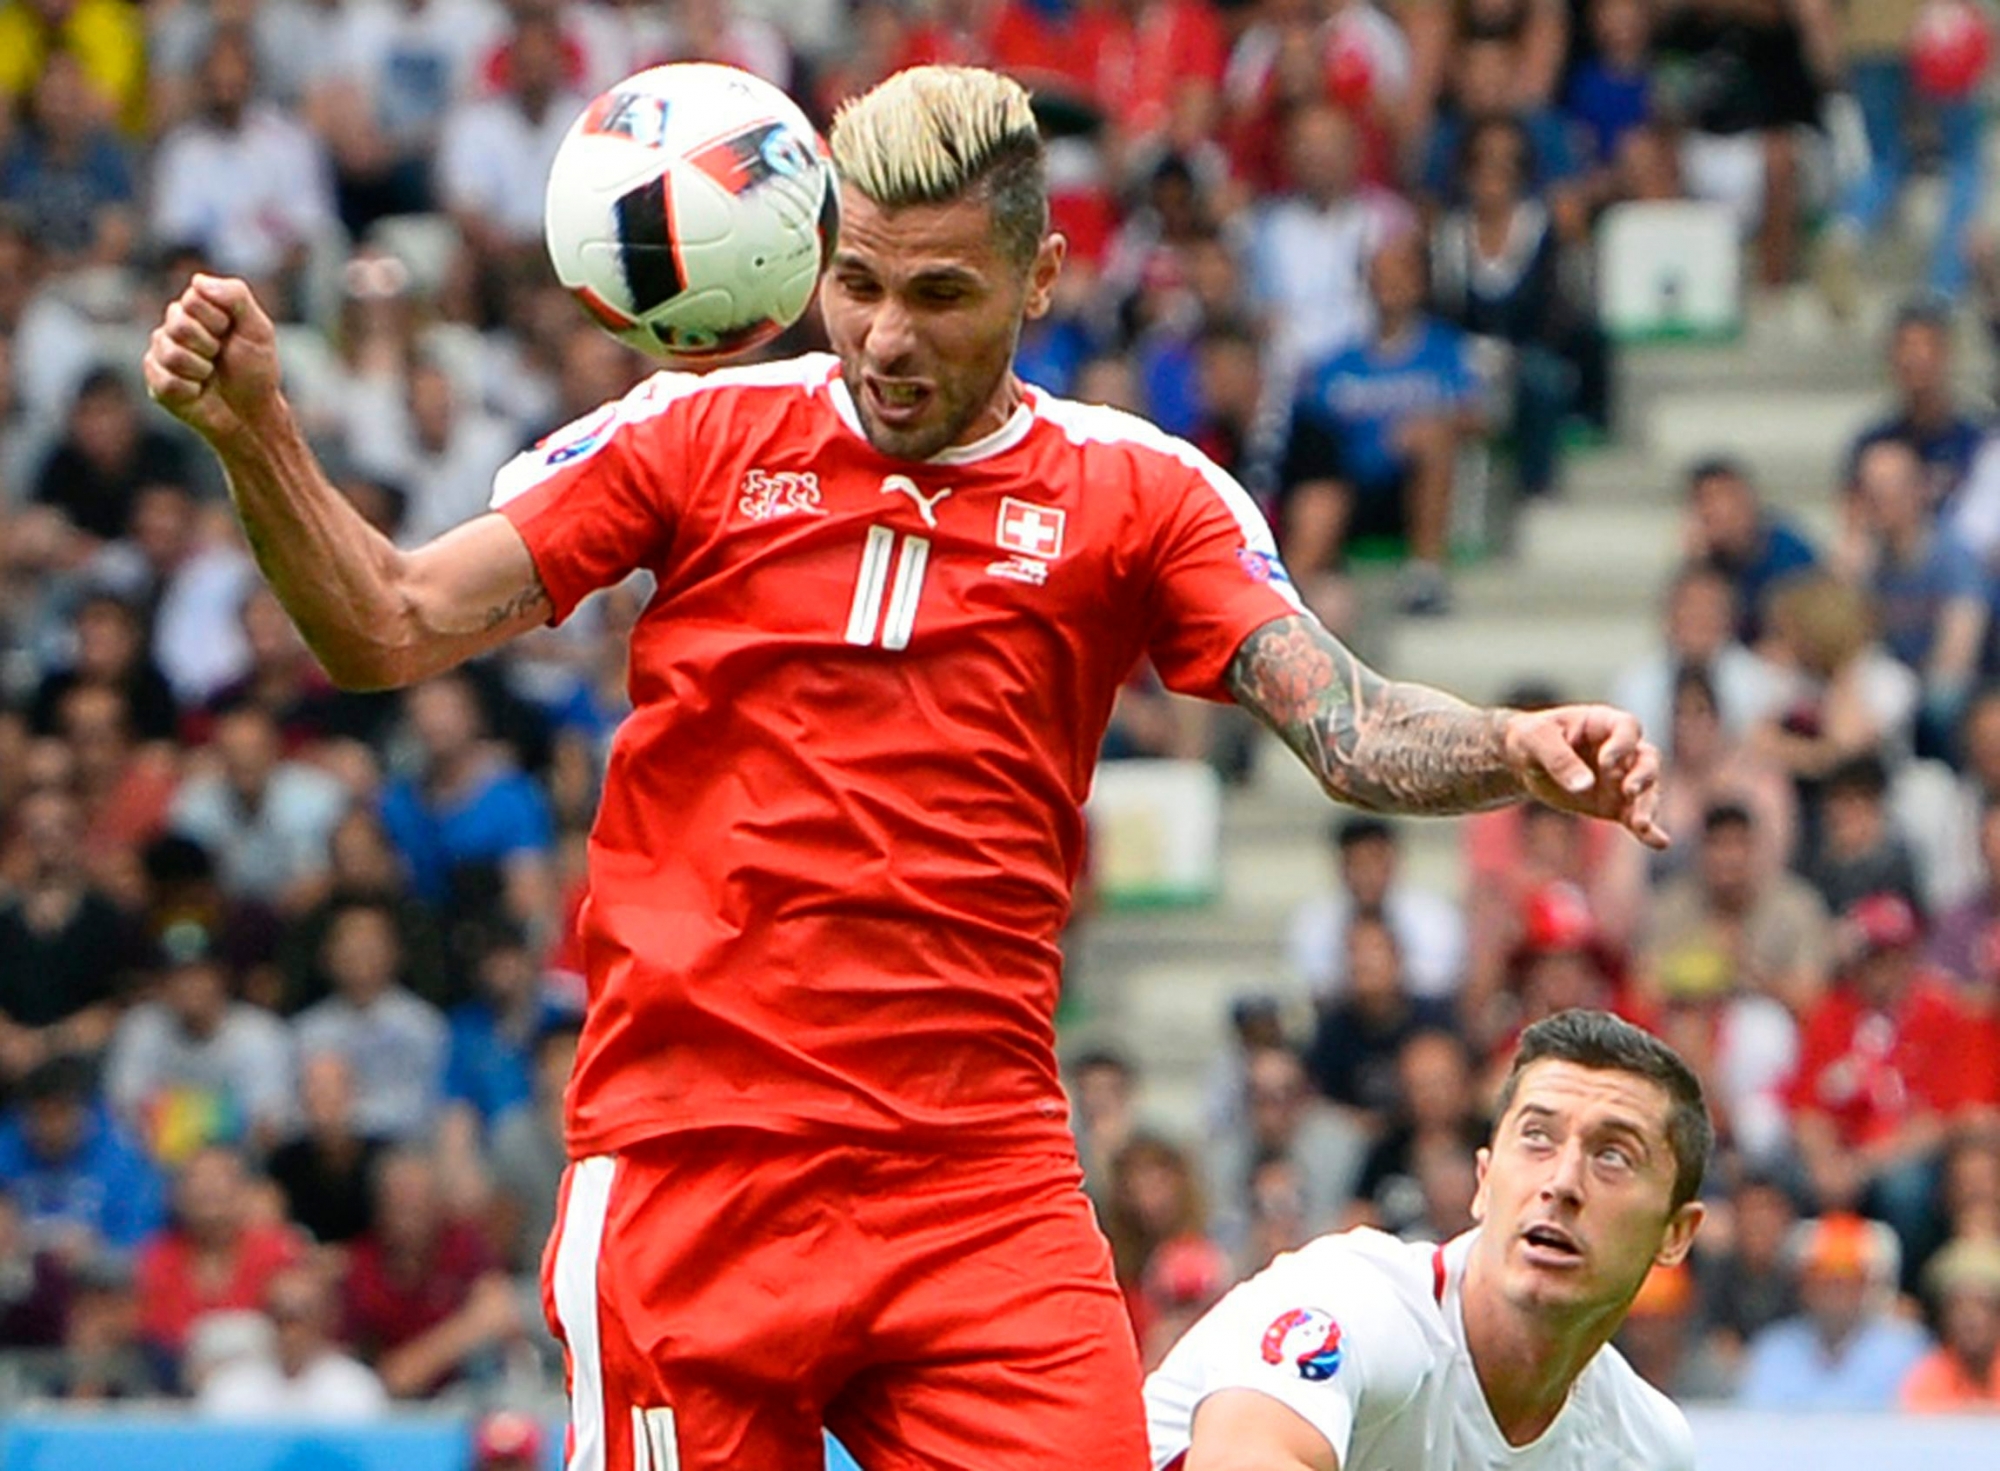 epa05389616 Valon Behrami (L) of Switzerland in action against Robert Lewandowski of Poland during the UEFA EURO 2016 round of 16 match between Switzerland and Poland at Stade Geoffroy Guichard in Saint-Etienne, France, 25 June 2016.....(RESTRICTIONS APPLY: For editorial news reporting purposes only. Not used for commercial or marketing purposes without prior written approval of UEFA. Images must appear as still images and must not emulate match action video footage. Photographs published in online publications (whether via the Internet or otherwise) shall have an interval of at least 20 seconds between the posting.)  EPA/CJ GUNTHER   EDITORIAL USE ONLYValon Behrami FUSSBALL EM 2016 ACHTELFINAL CHE POL